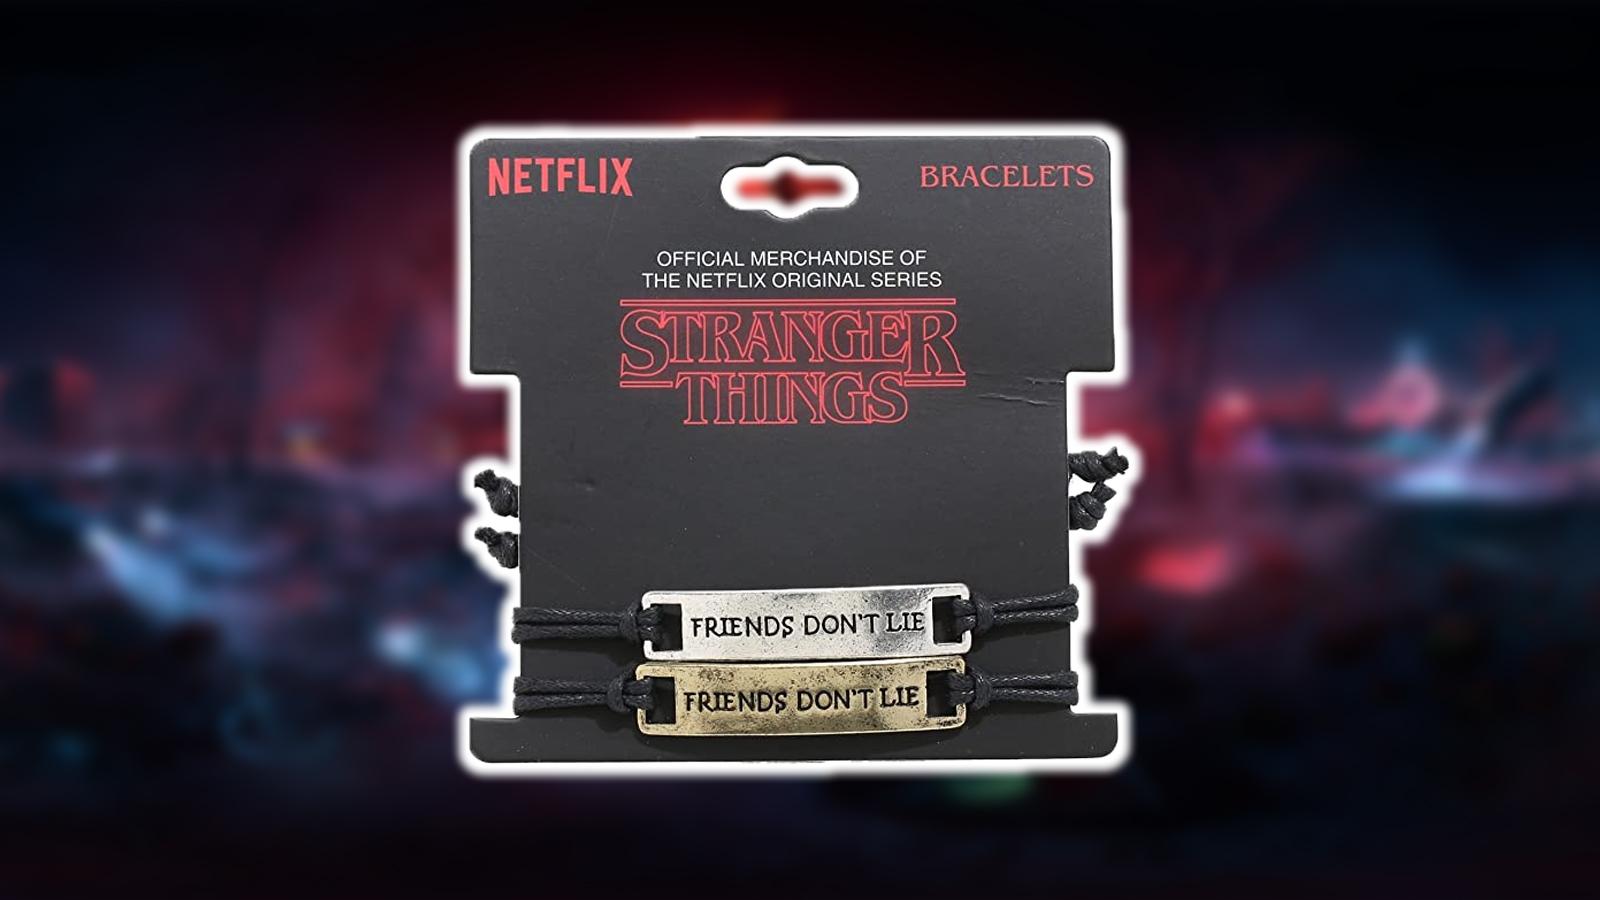 Best Stranger Things merch — T-shirts, caps, figurines and more